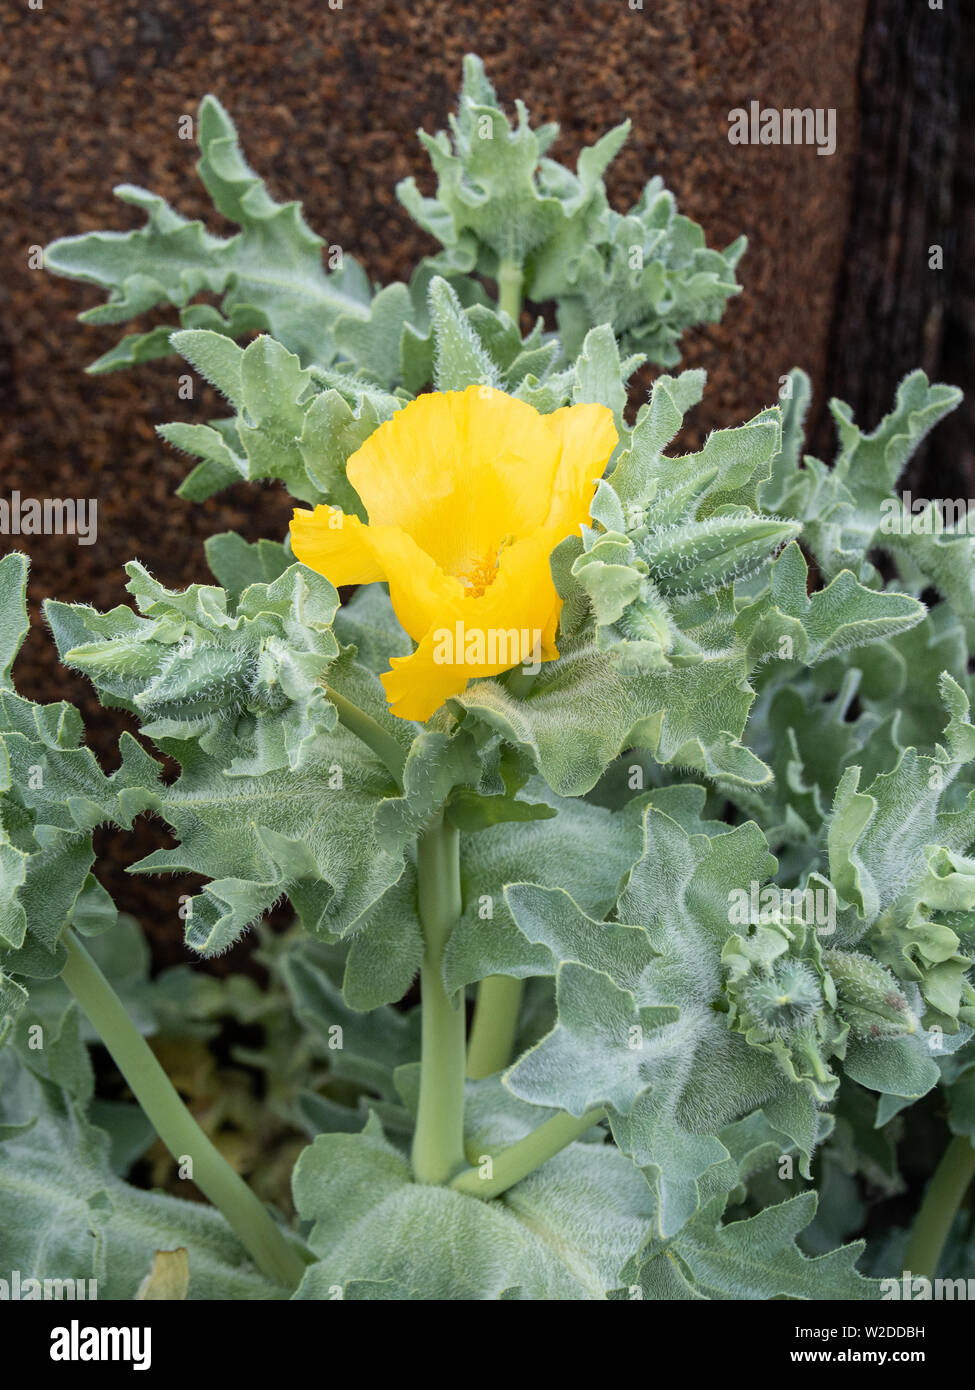 The bright yellow flower of the yellow horned sea poppy Glaucium flavum against the the glaucous grey foliage Stock Photo